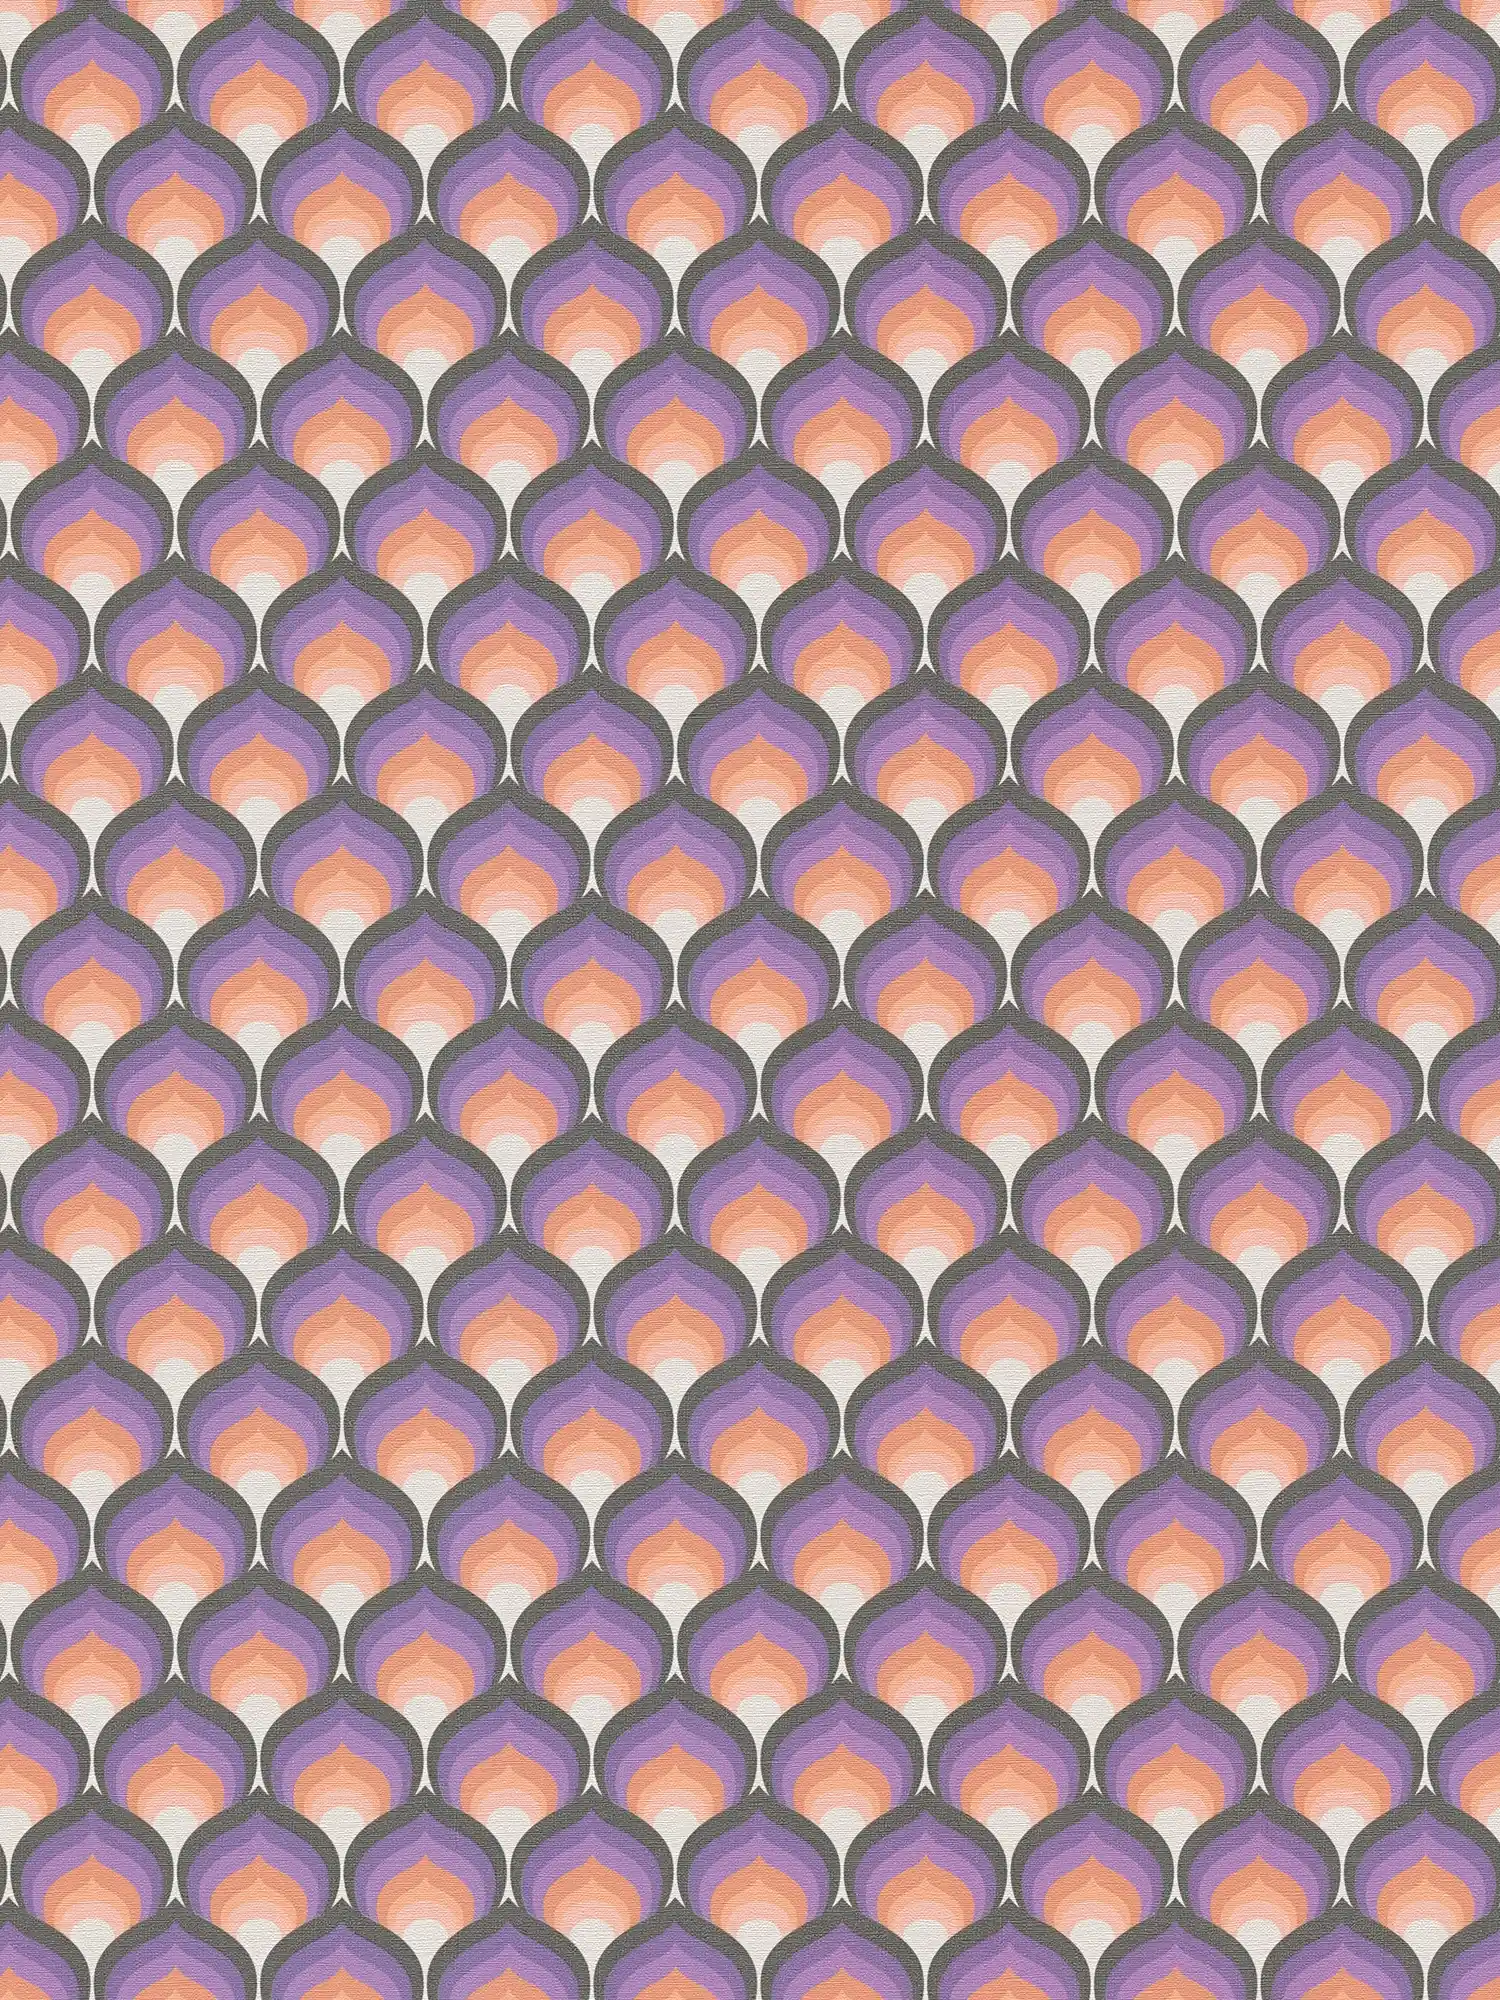 Retro style wallpaper with abstract scale pattern - orange, black, purple
